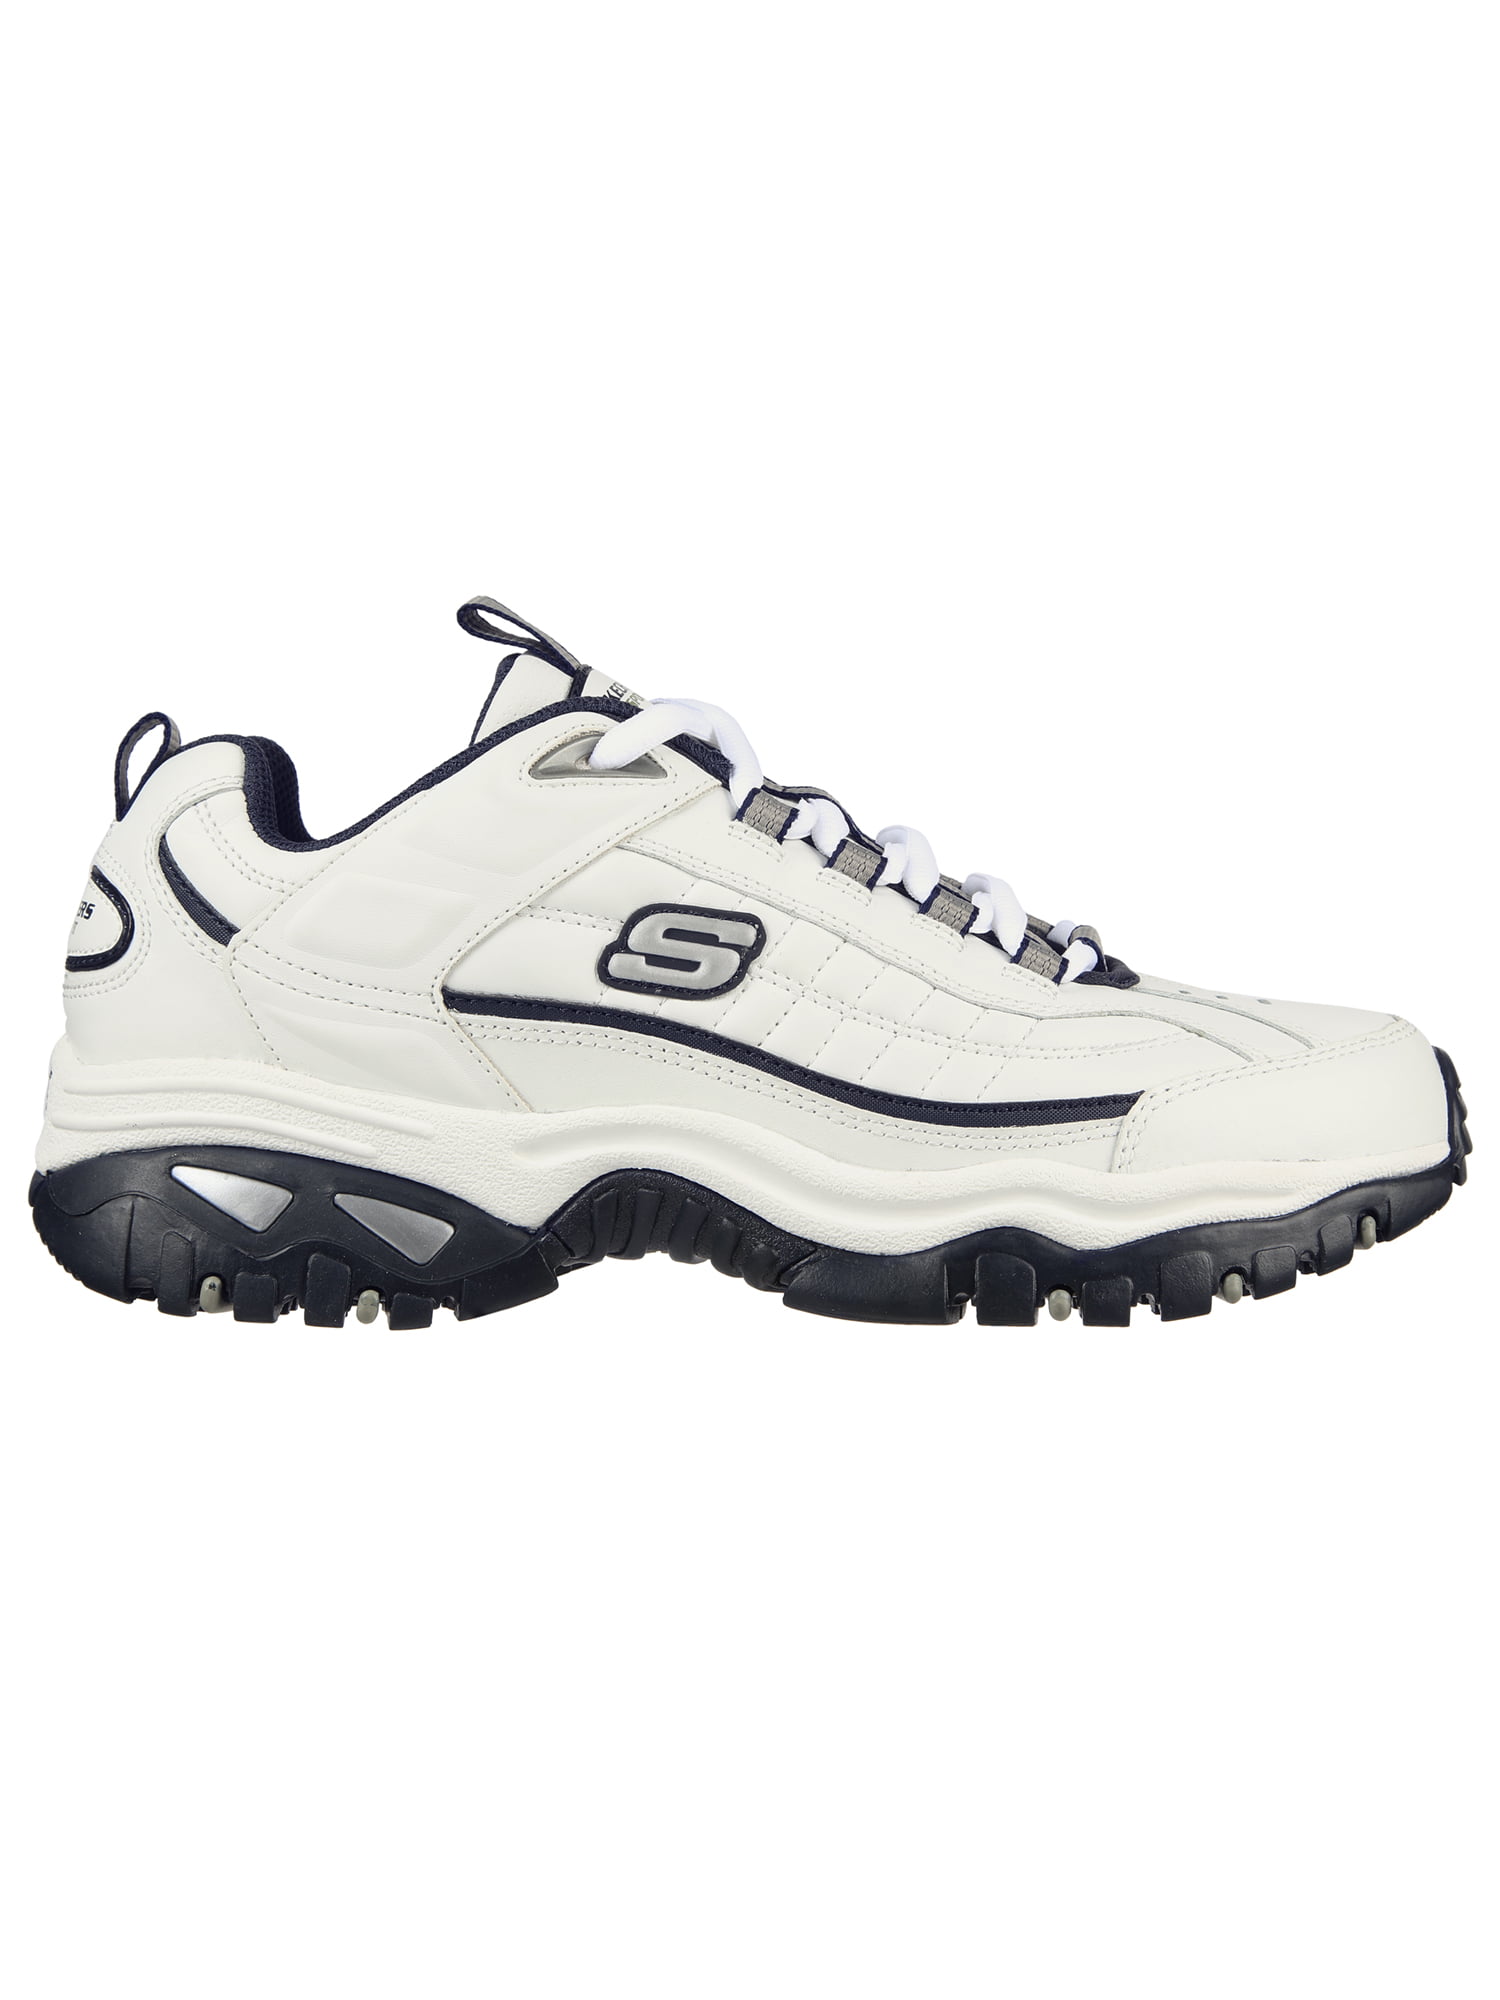 Skechers Men's Energy After Burn Athletic Sneakers (Wide Width Available)